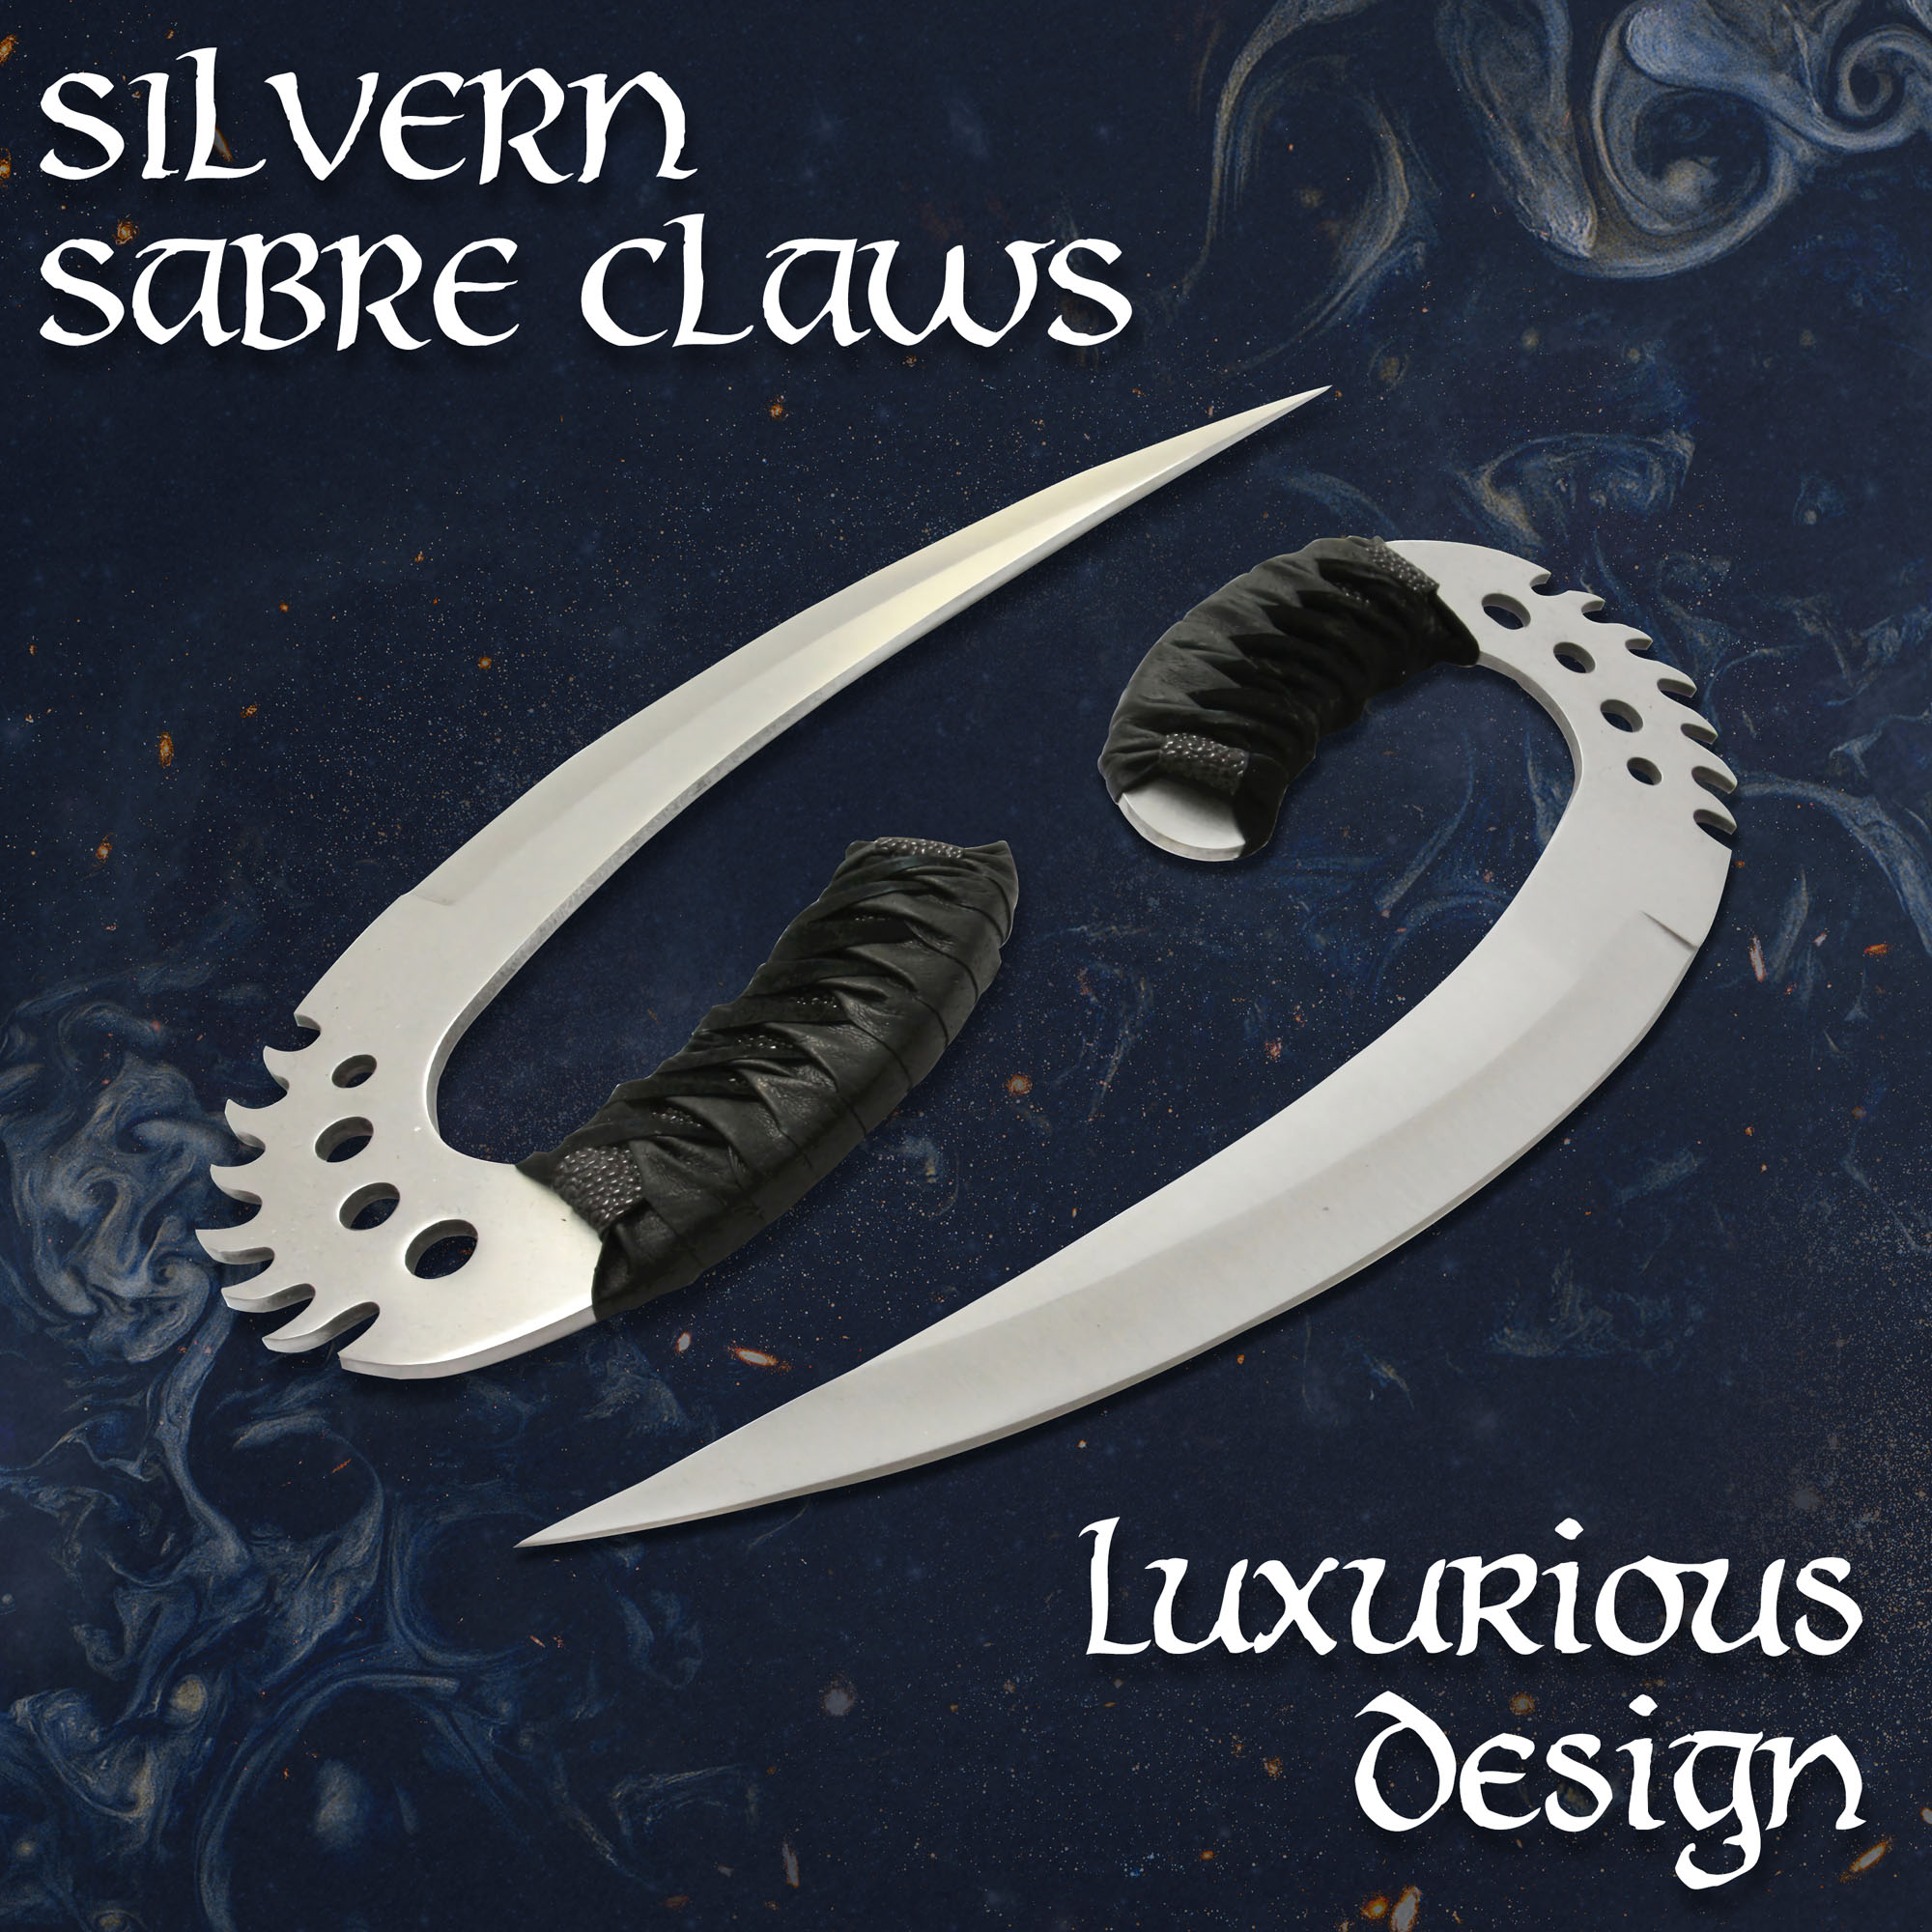 The Chronicles of Riddick - Silvern Sabre Claws